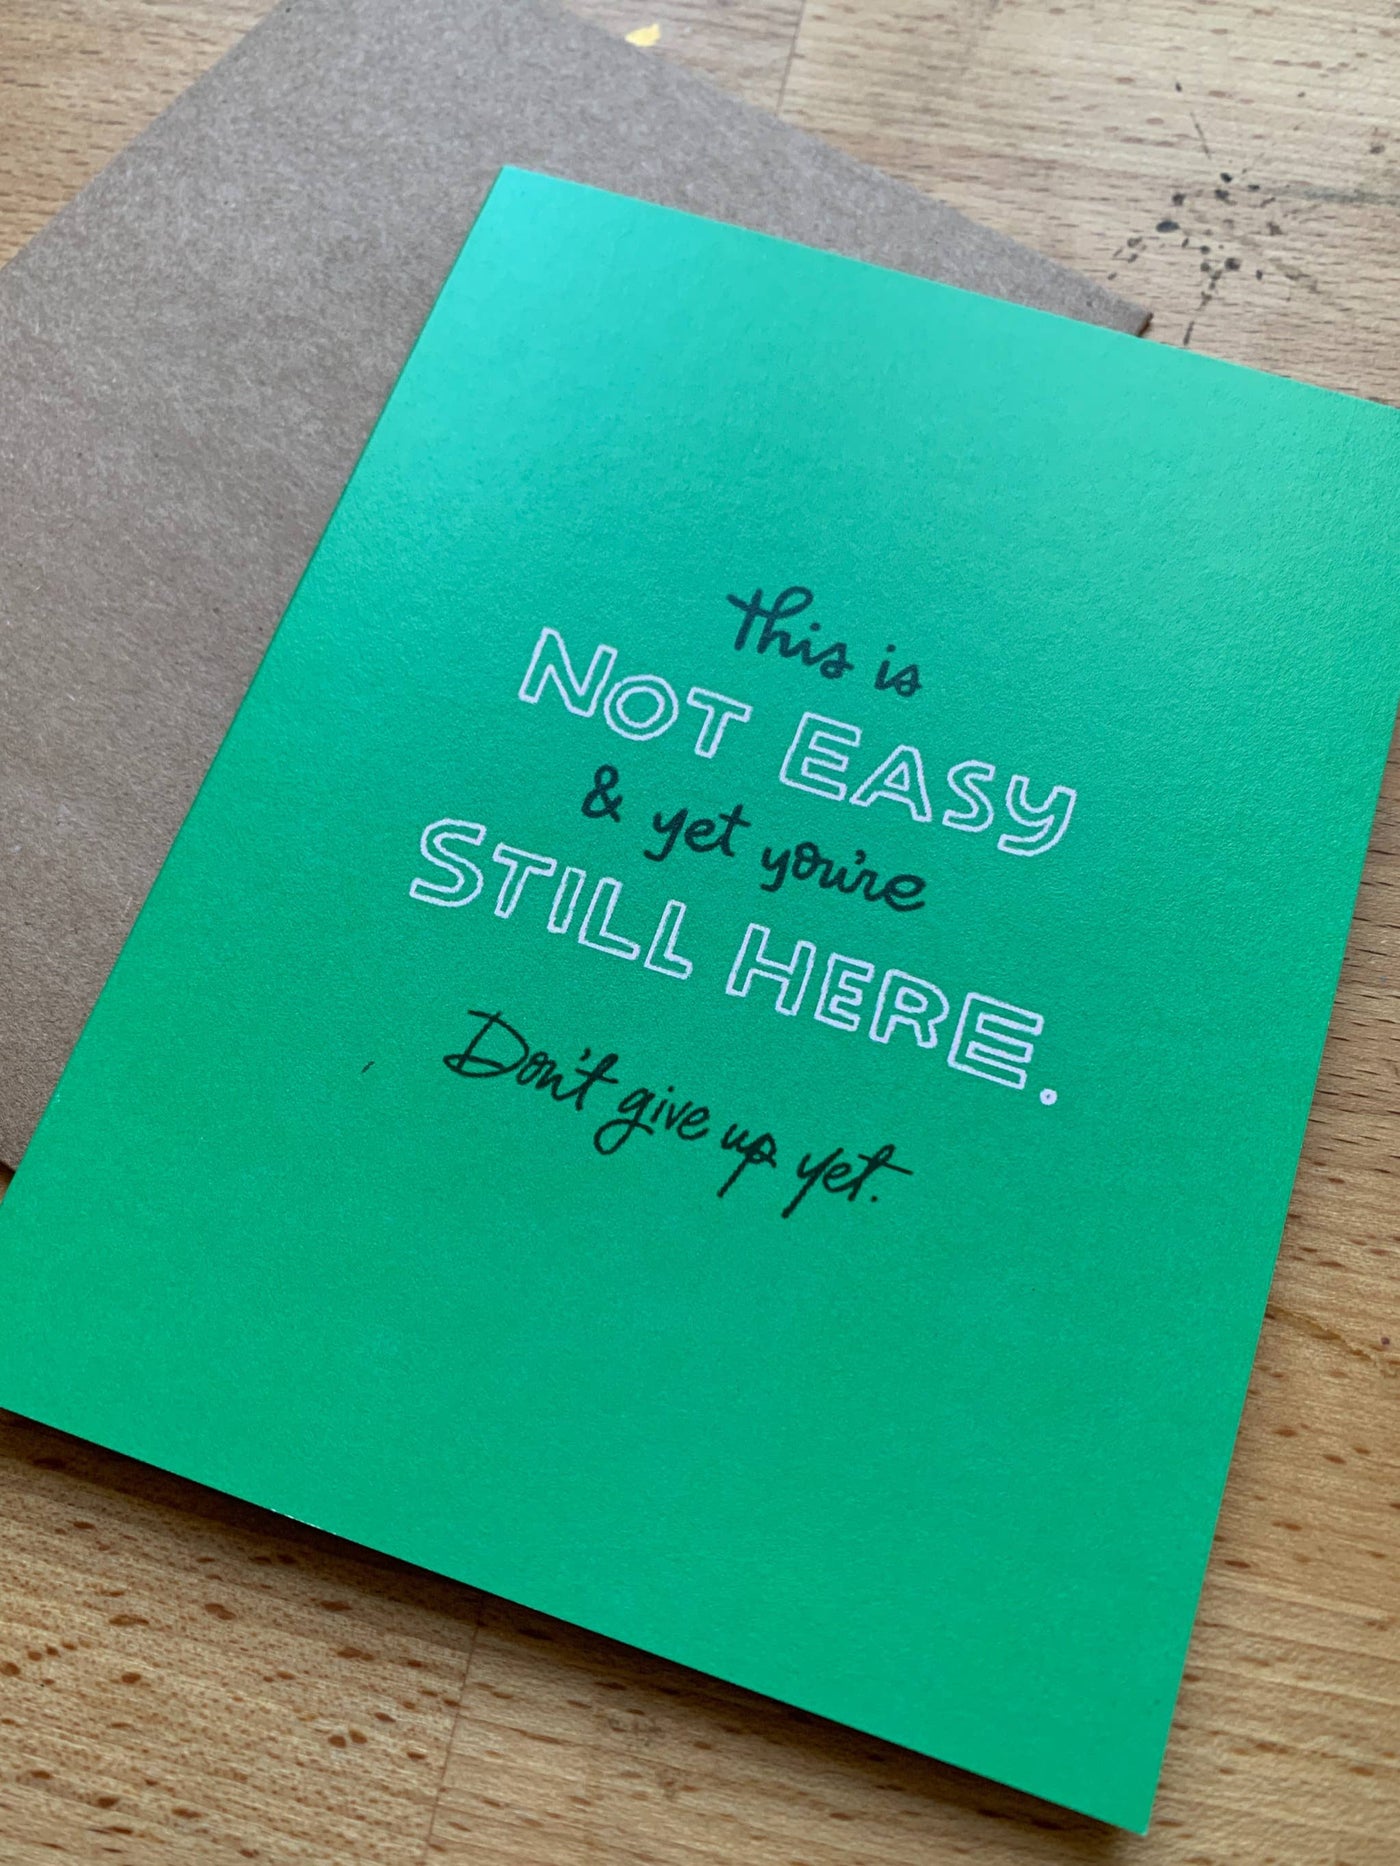 Don't Give Up Yet Encouragement Card